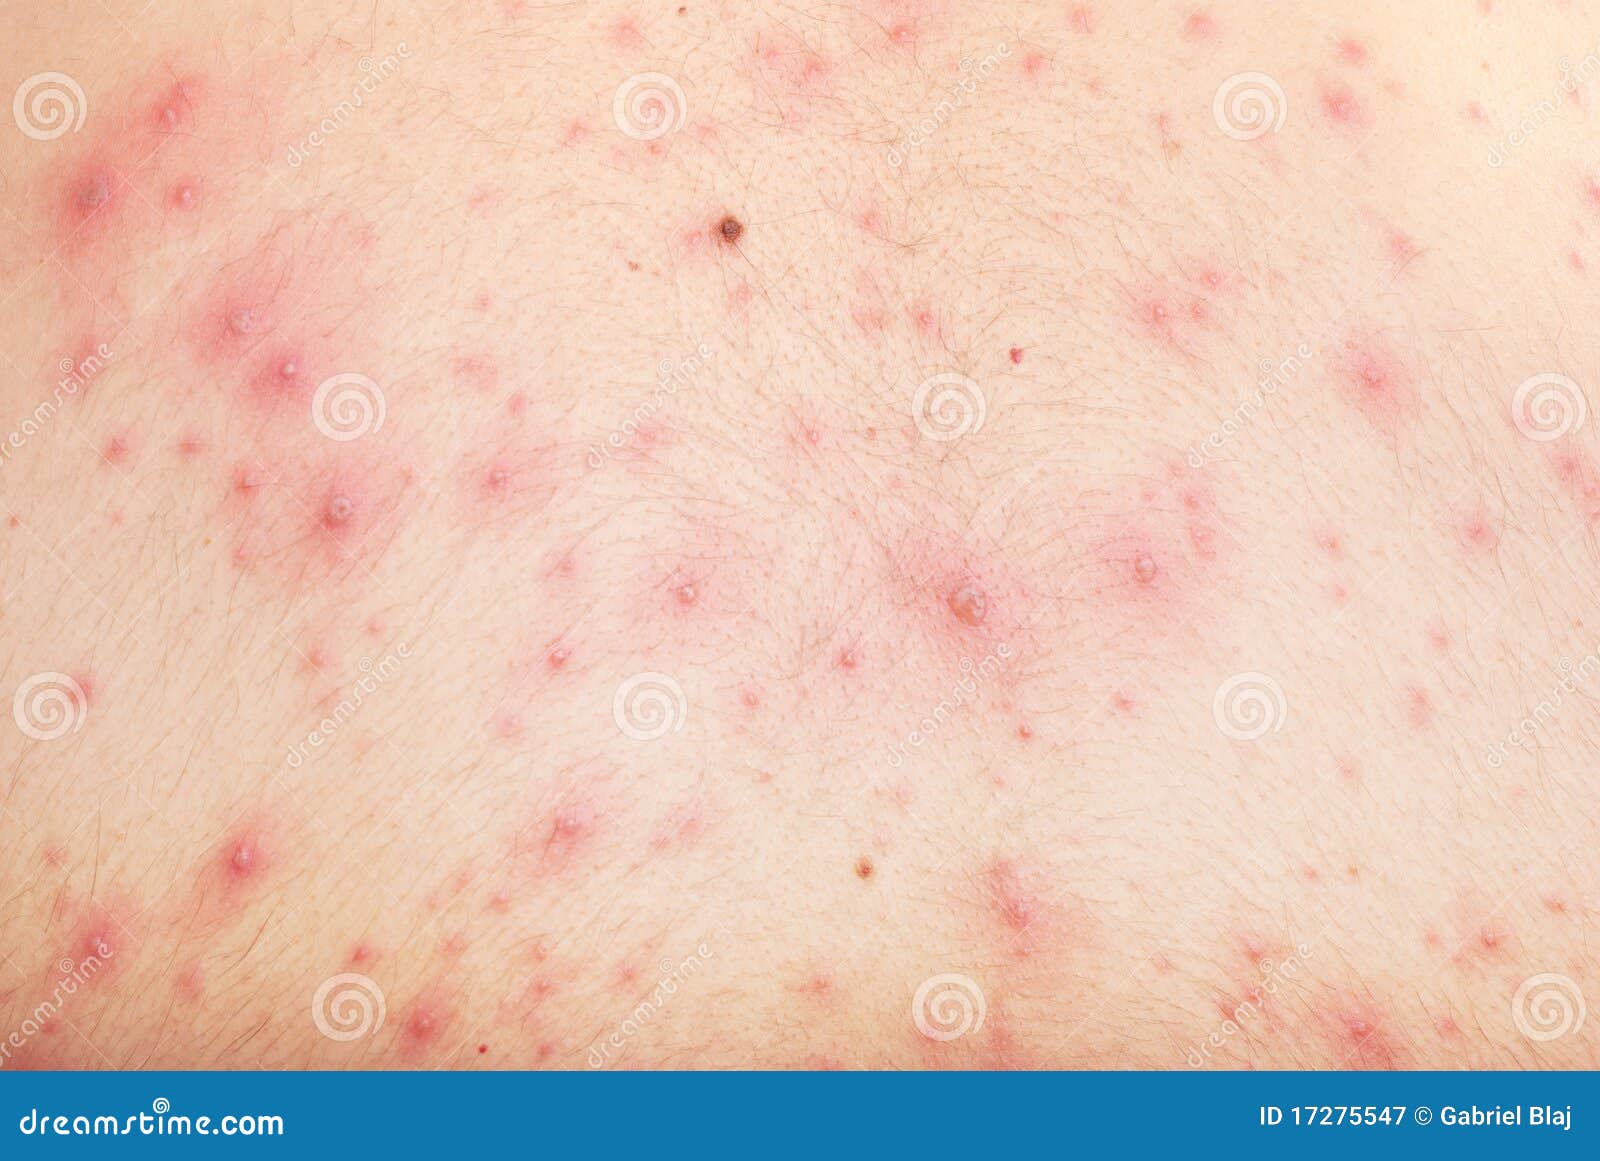 chicken pox pictures in adults